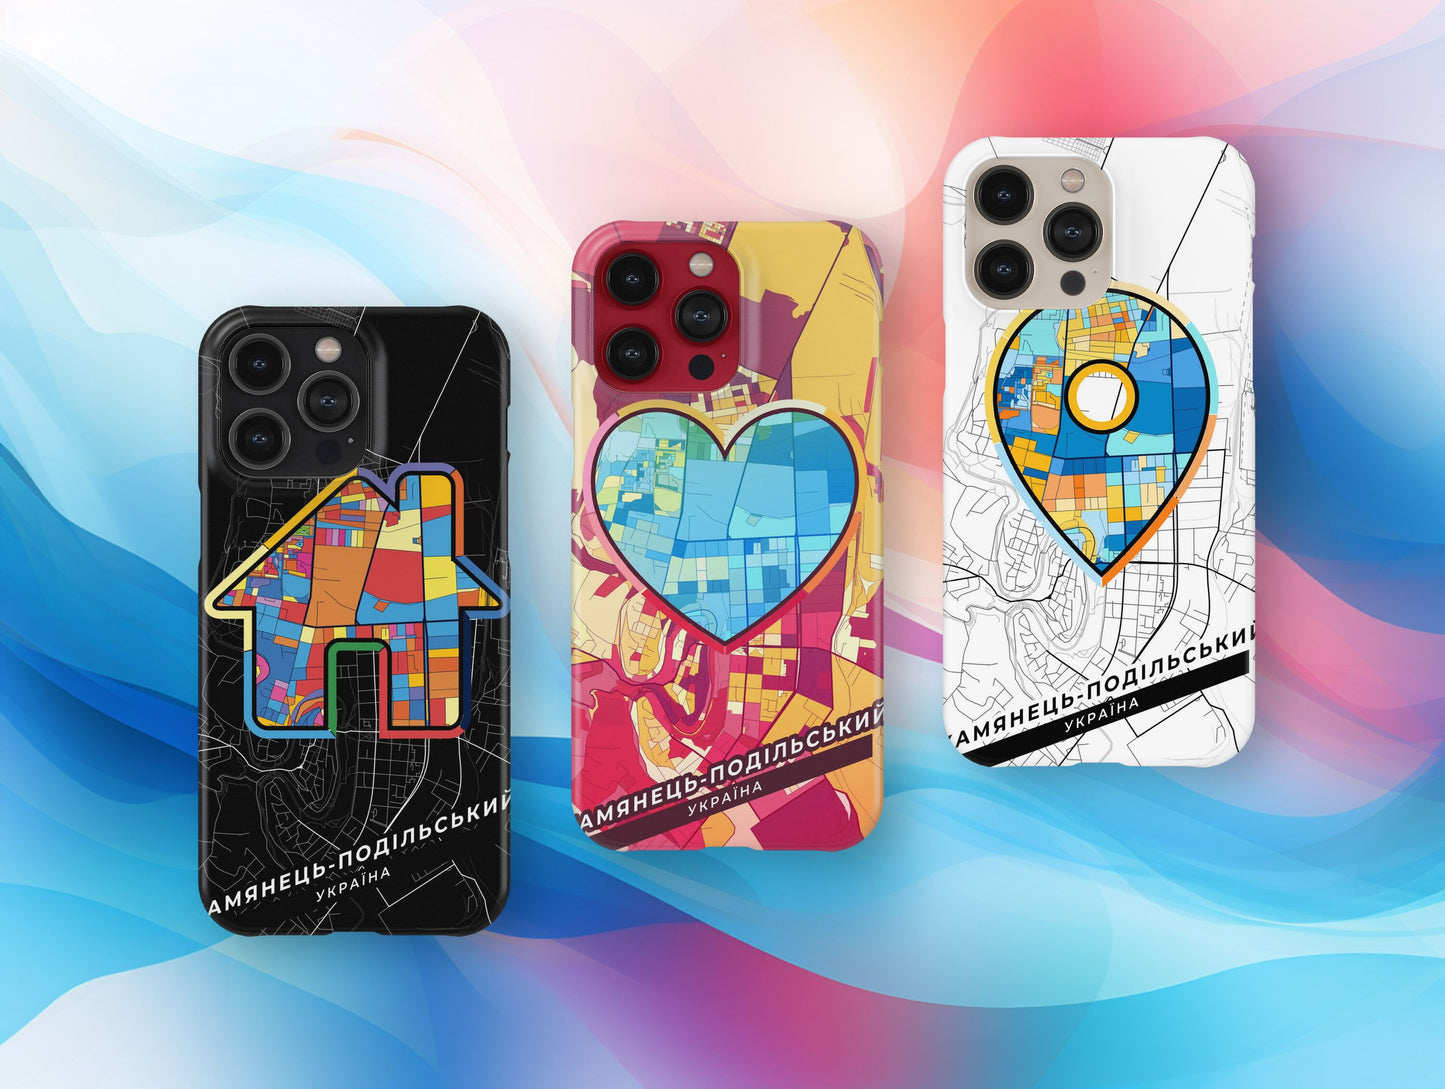 Kamianets-Podilskyi Ukraine slim phone case with colorful icon. Birthday, wedding or housewarming gift. Couple match cases.